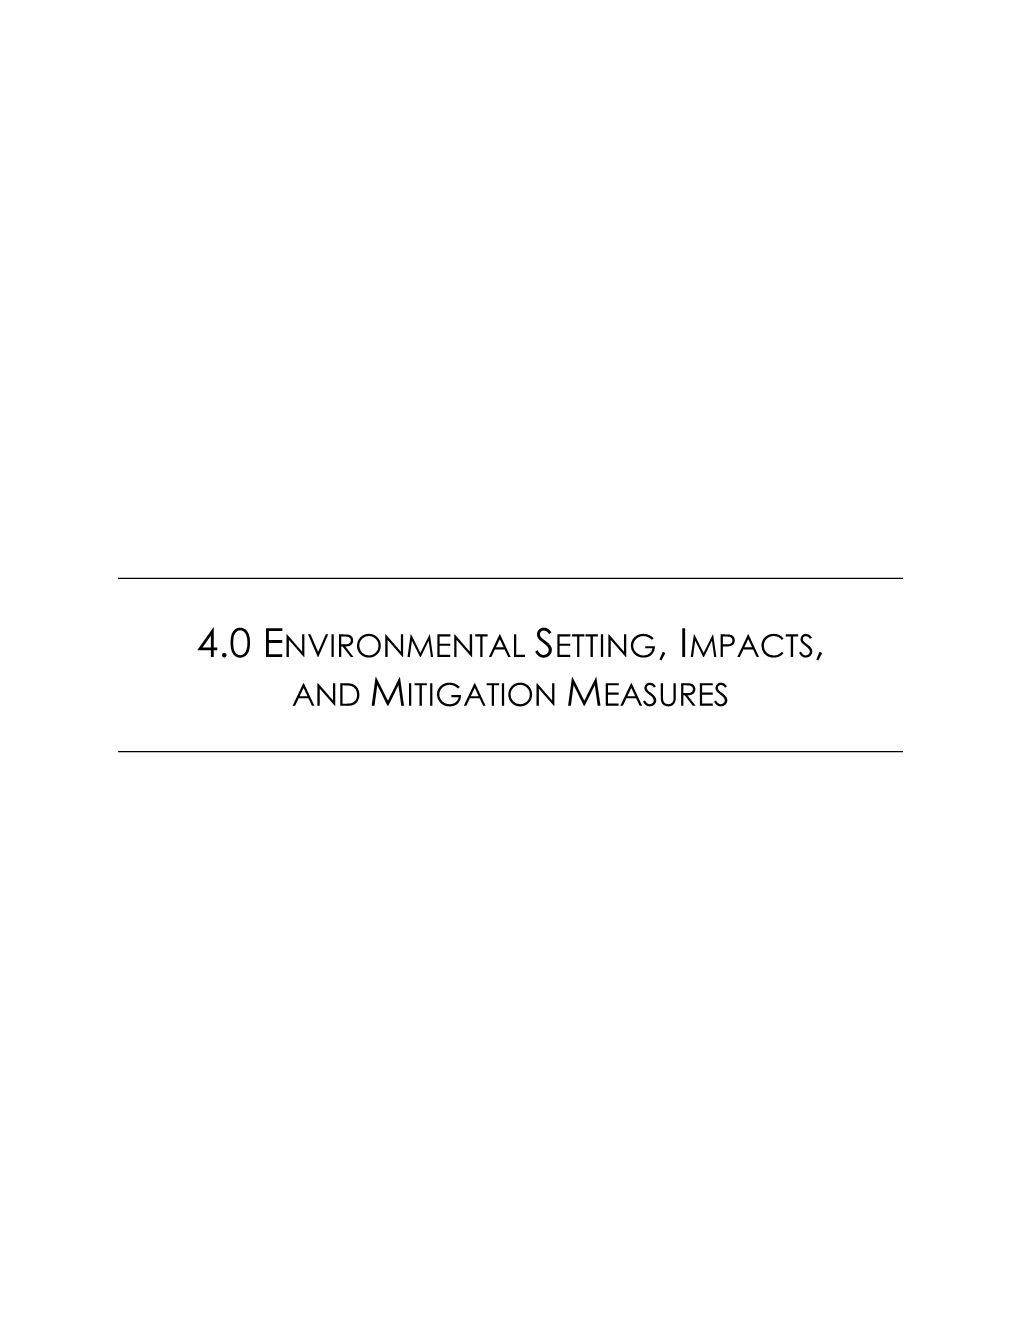 Environmental Setting, Impacts, and Mitigation Measures 4.0 Introduction to the Environmental Analysis and Assumptions Used